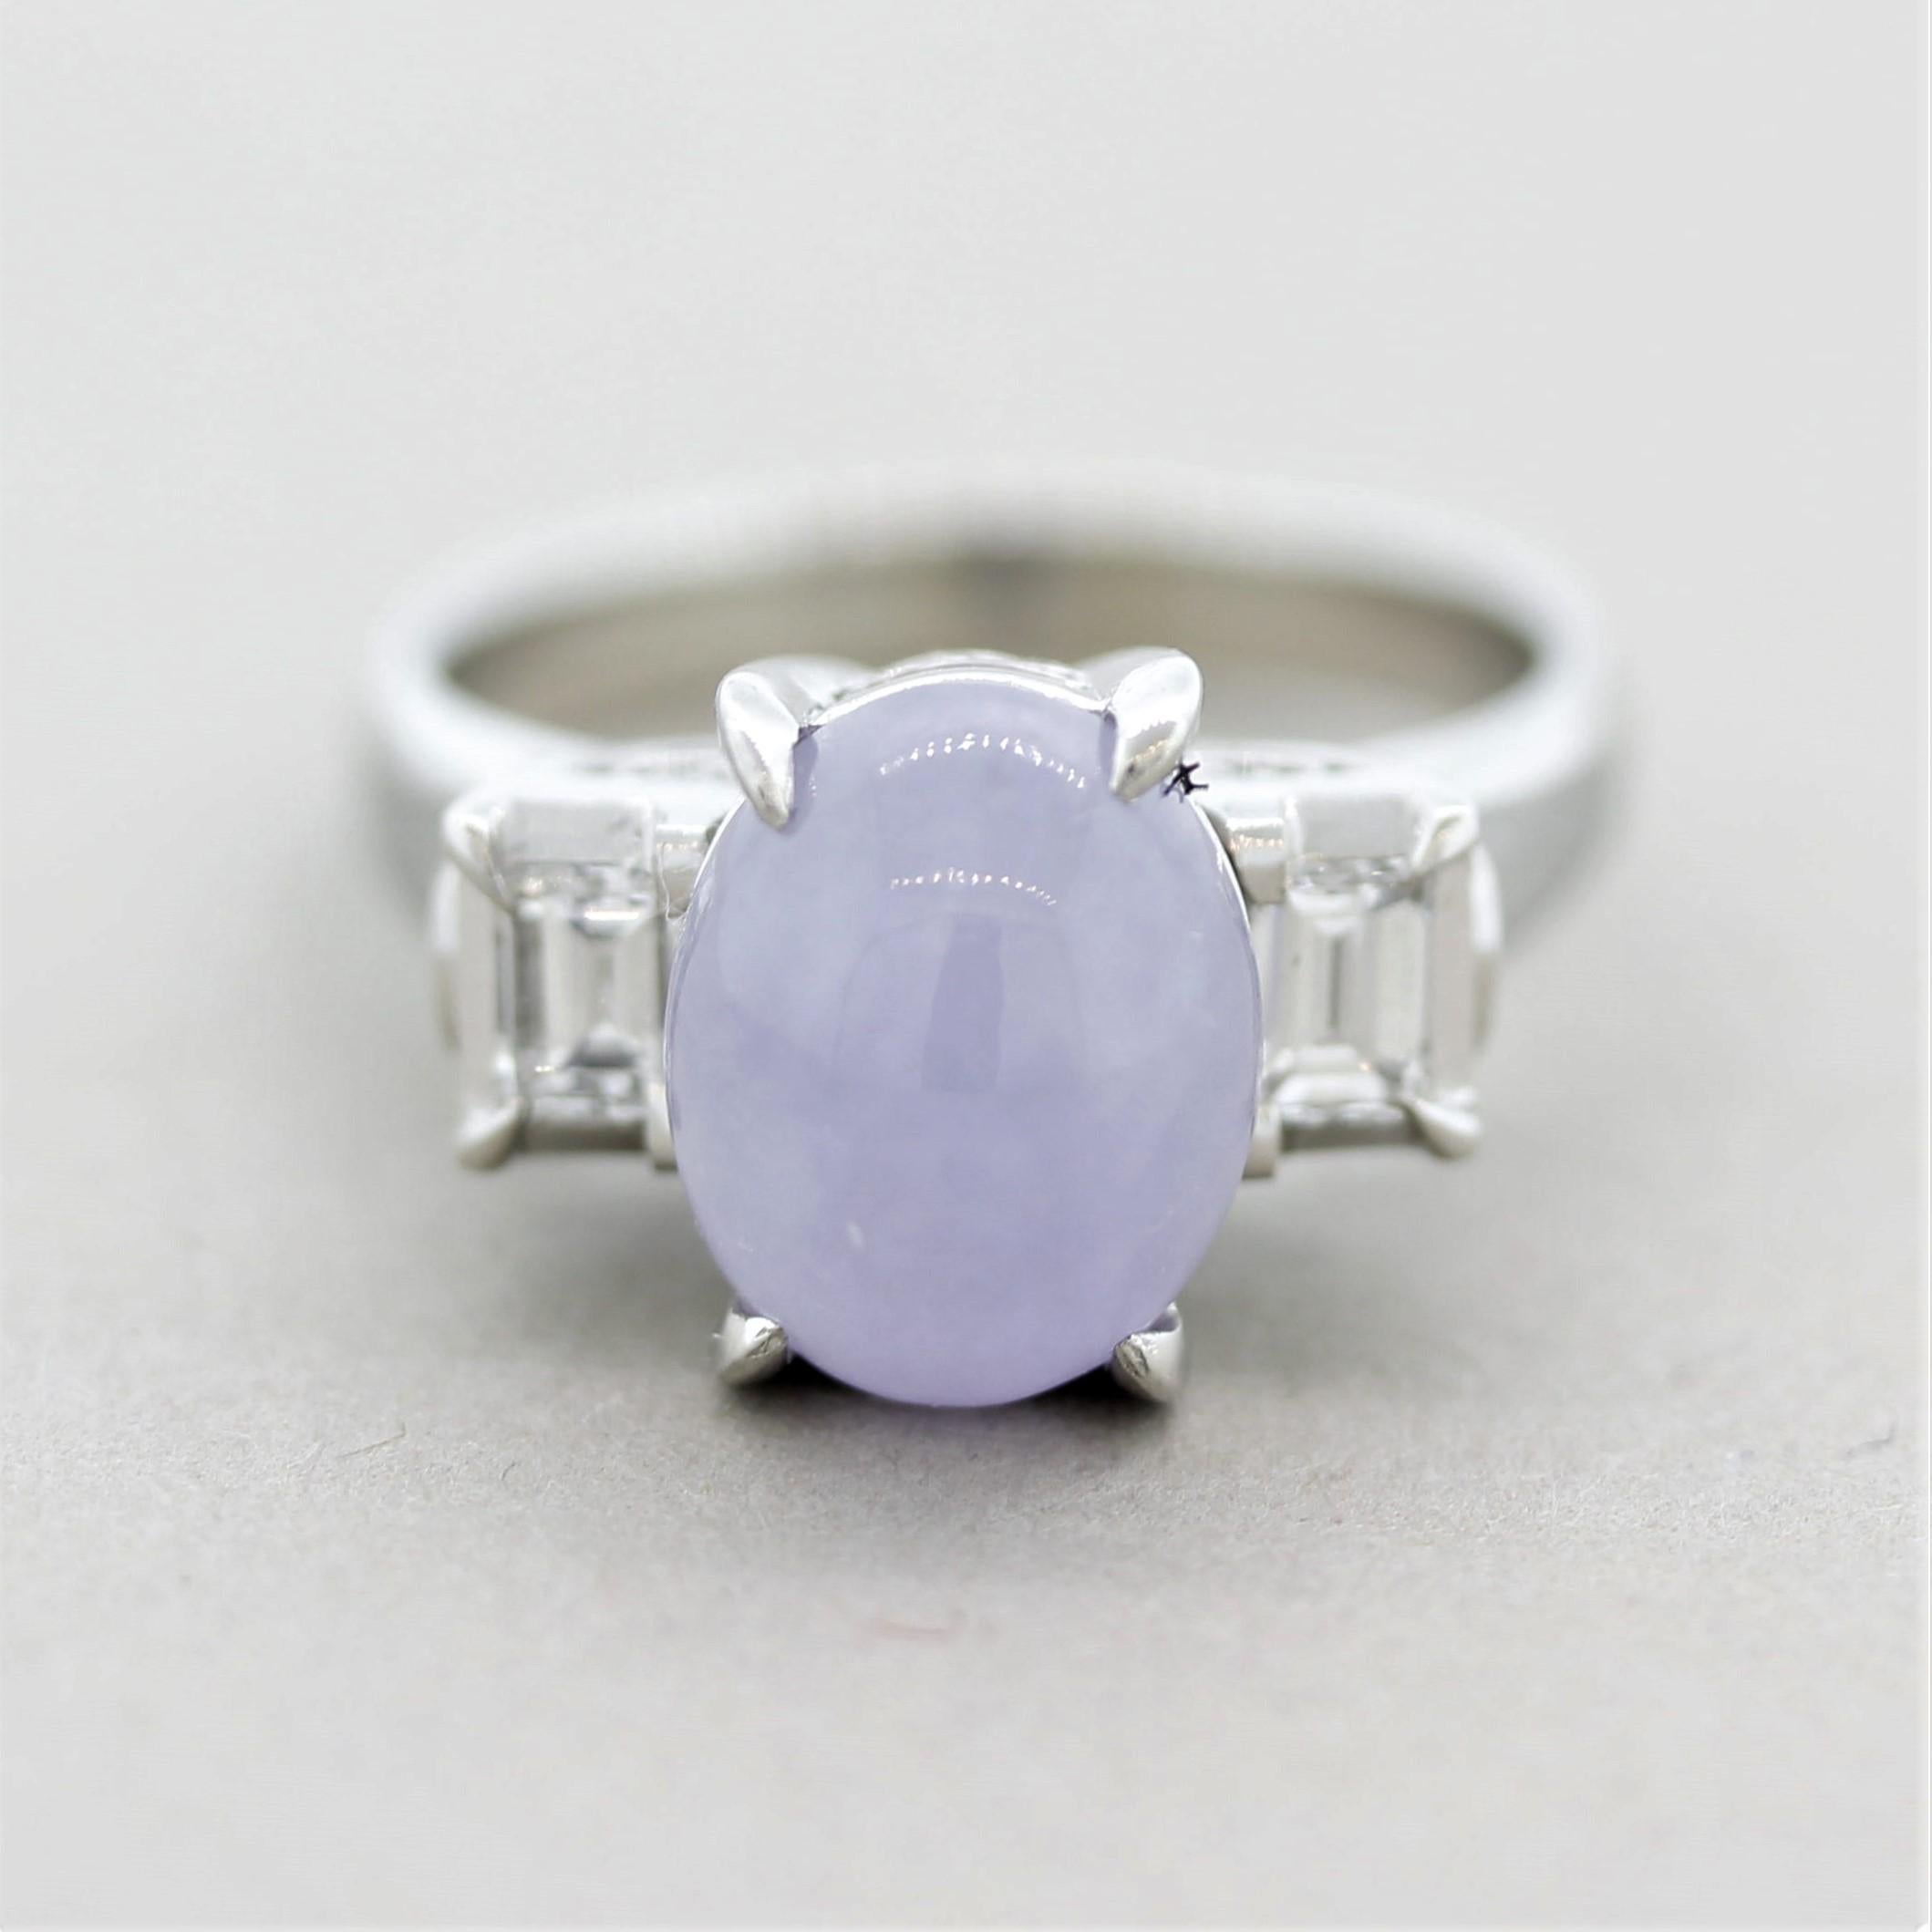 A classic 3-stone ring featuring a luscious lavender jade in the center. It weighs approximately 3 carats and has a soft glowing lavender color as light appears to emanate from the stone. It is accented by 2 baguette-cut diamonds set on its sides